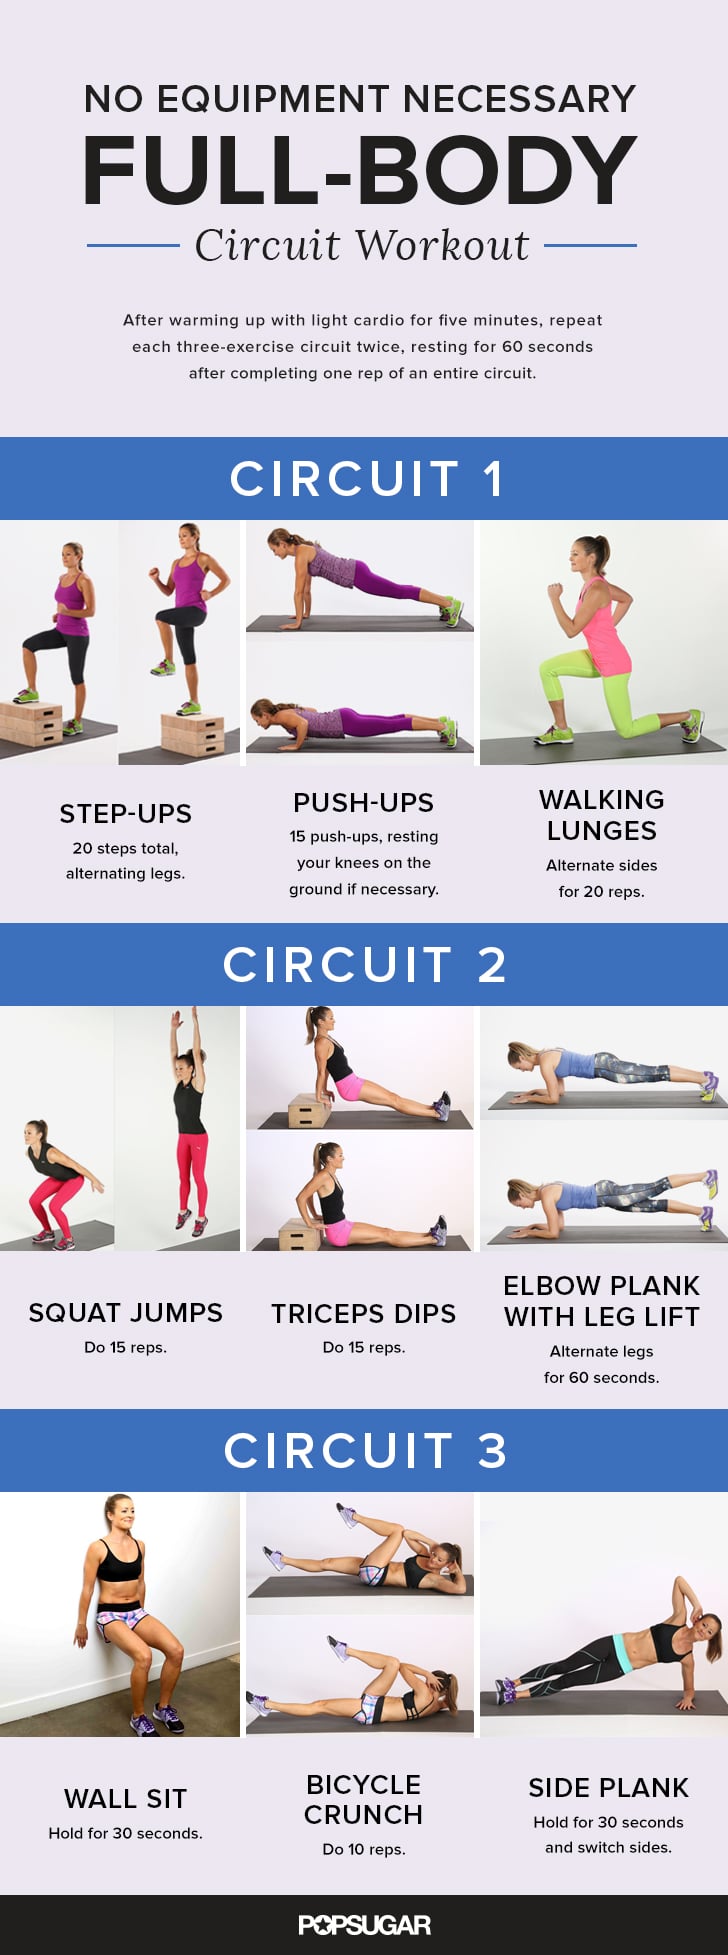 Full-Body Circuit Workout: An Example and the Benefits • Fitness